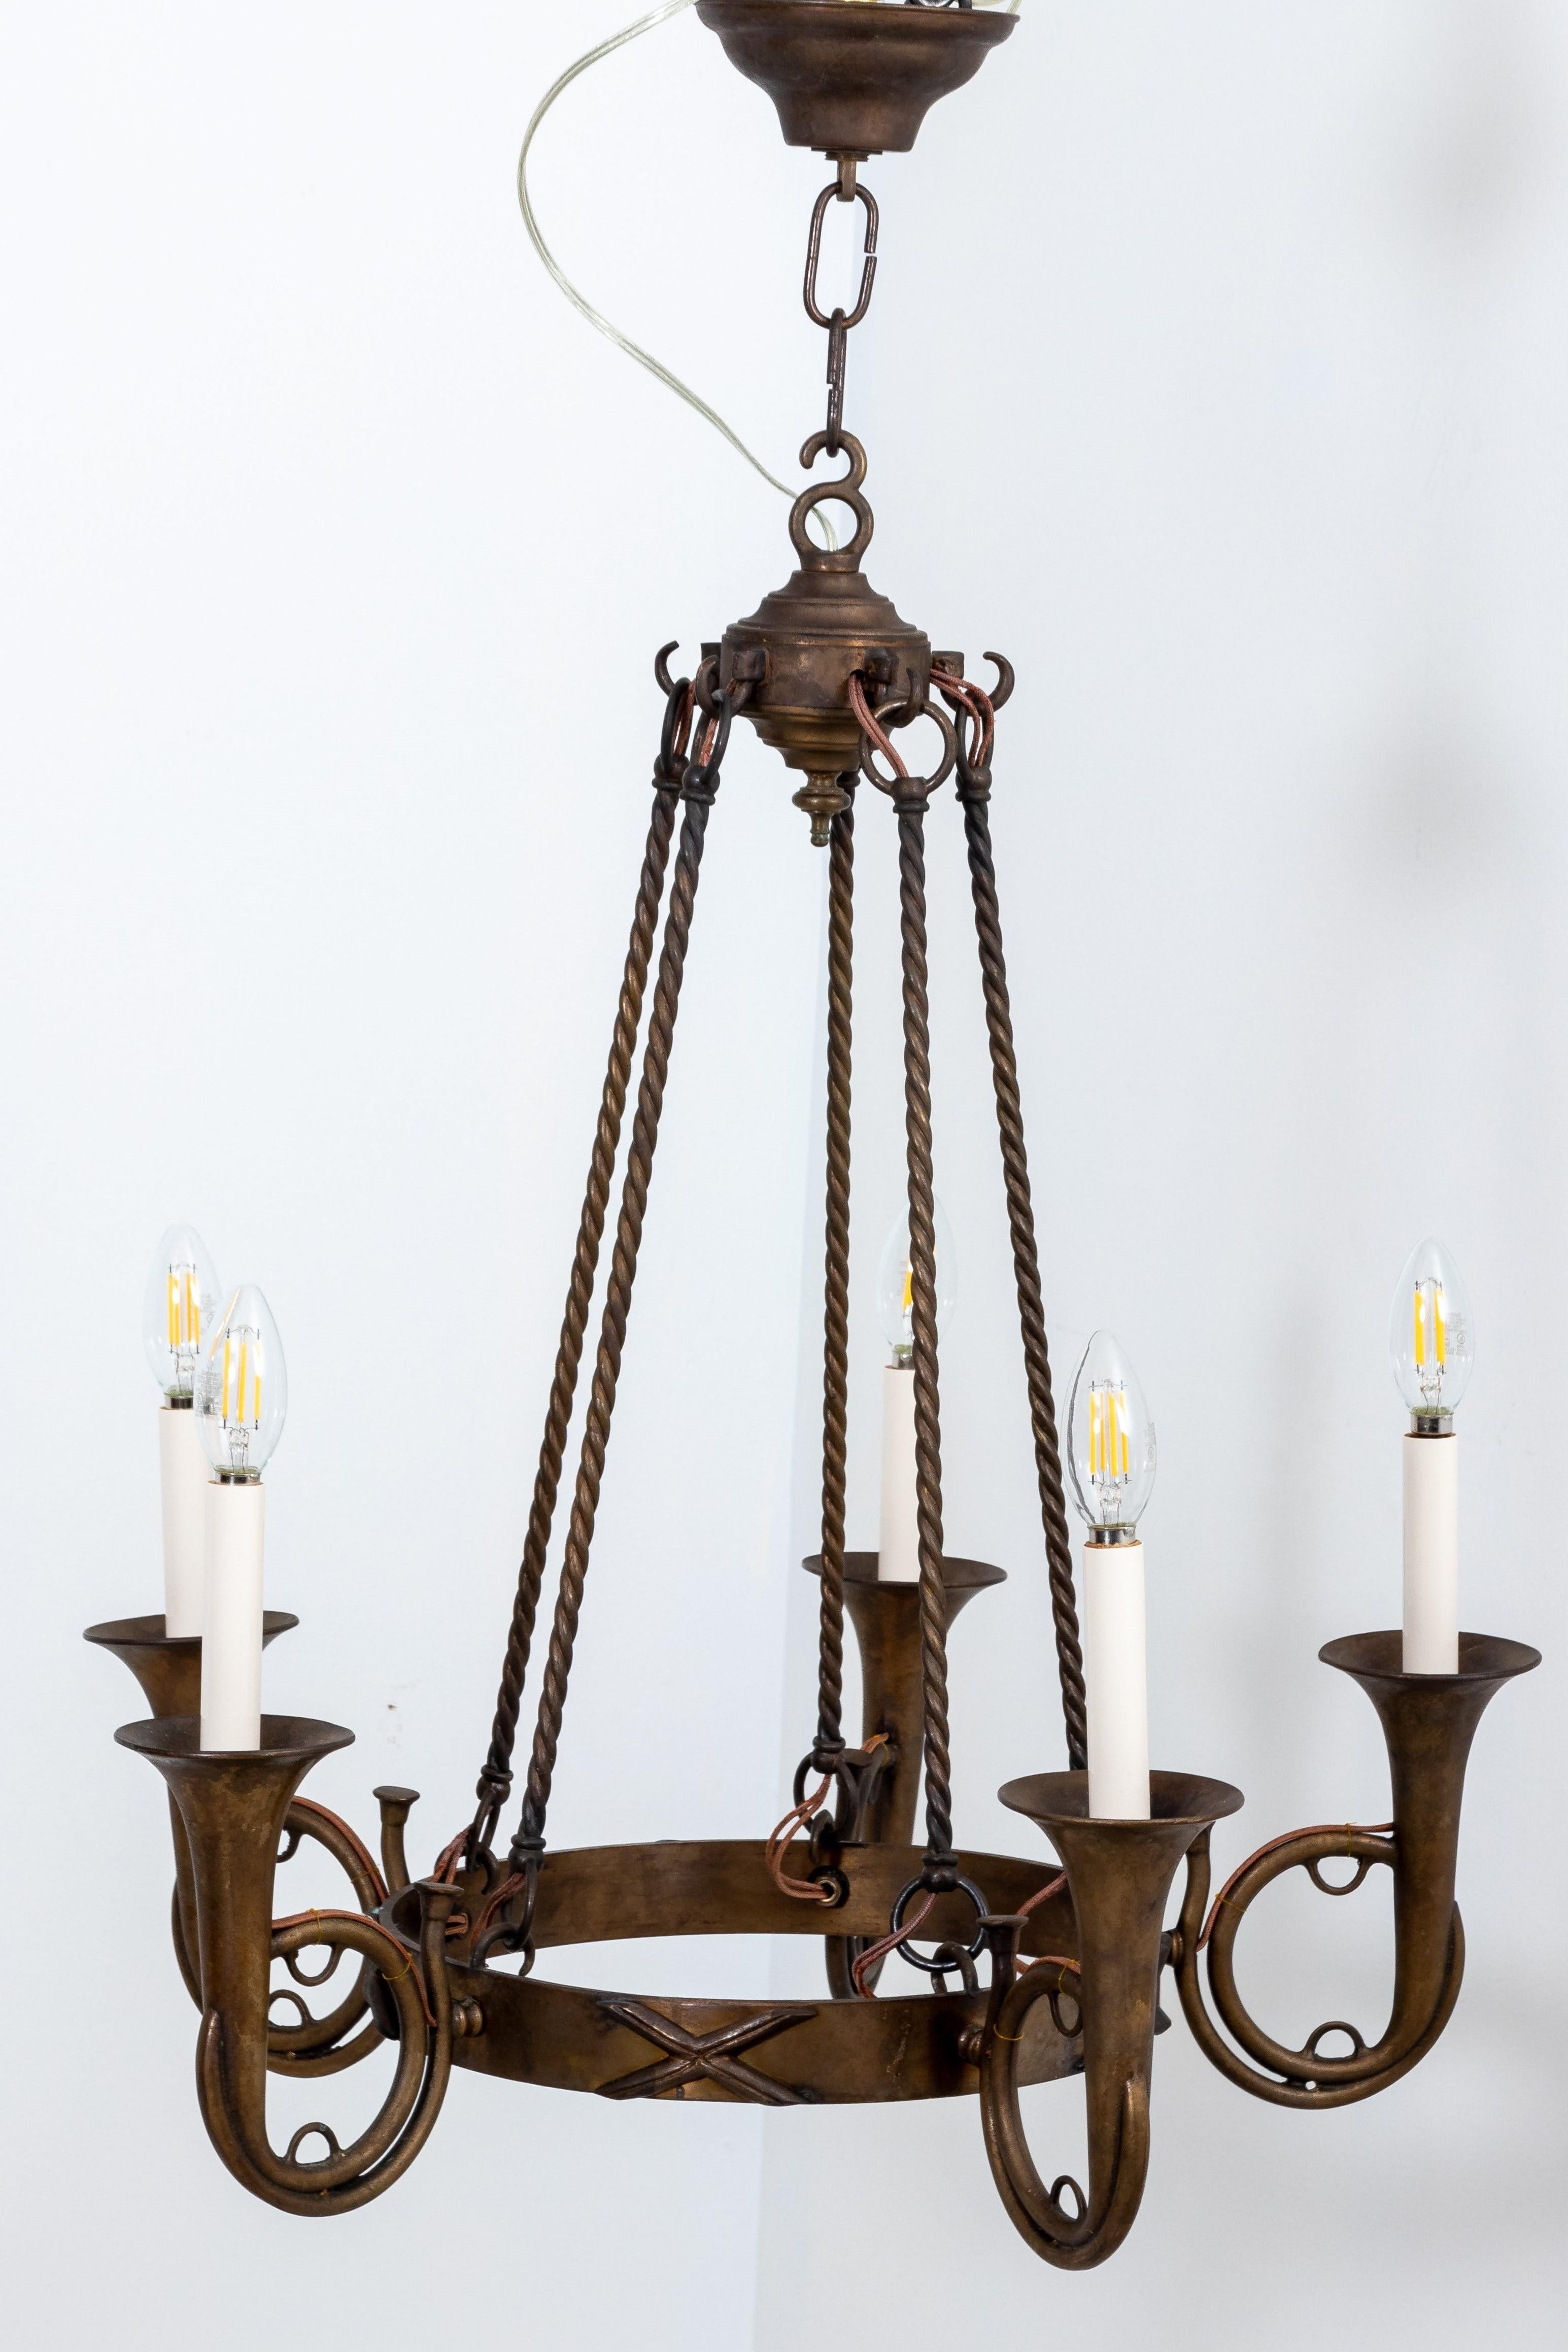 Brass Hollywood Regency hunting horn chandelier with five arms. Includes original ceiling canopy. Rewired with extra long wire. Extra chain can be added to increase length.